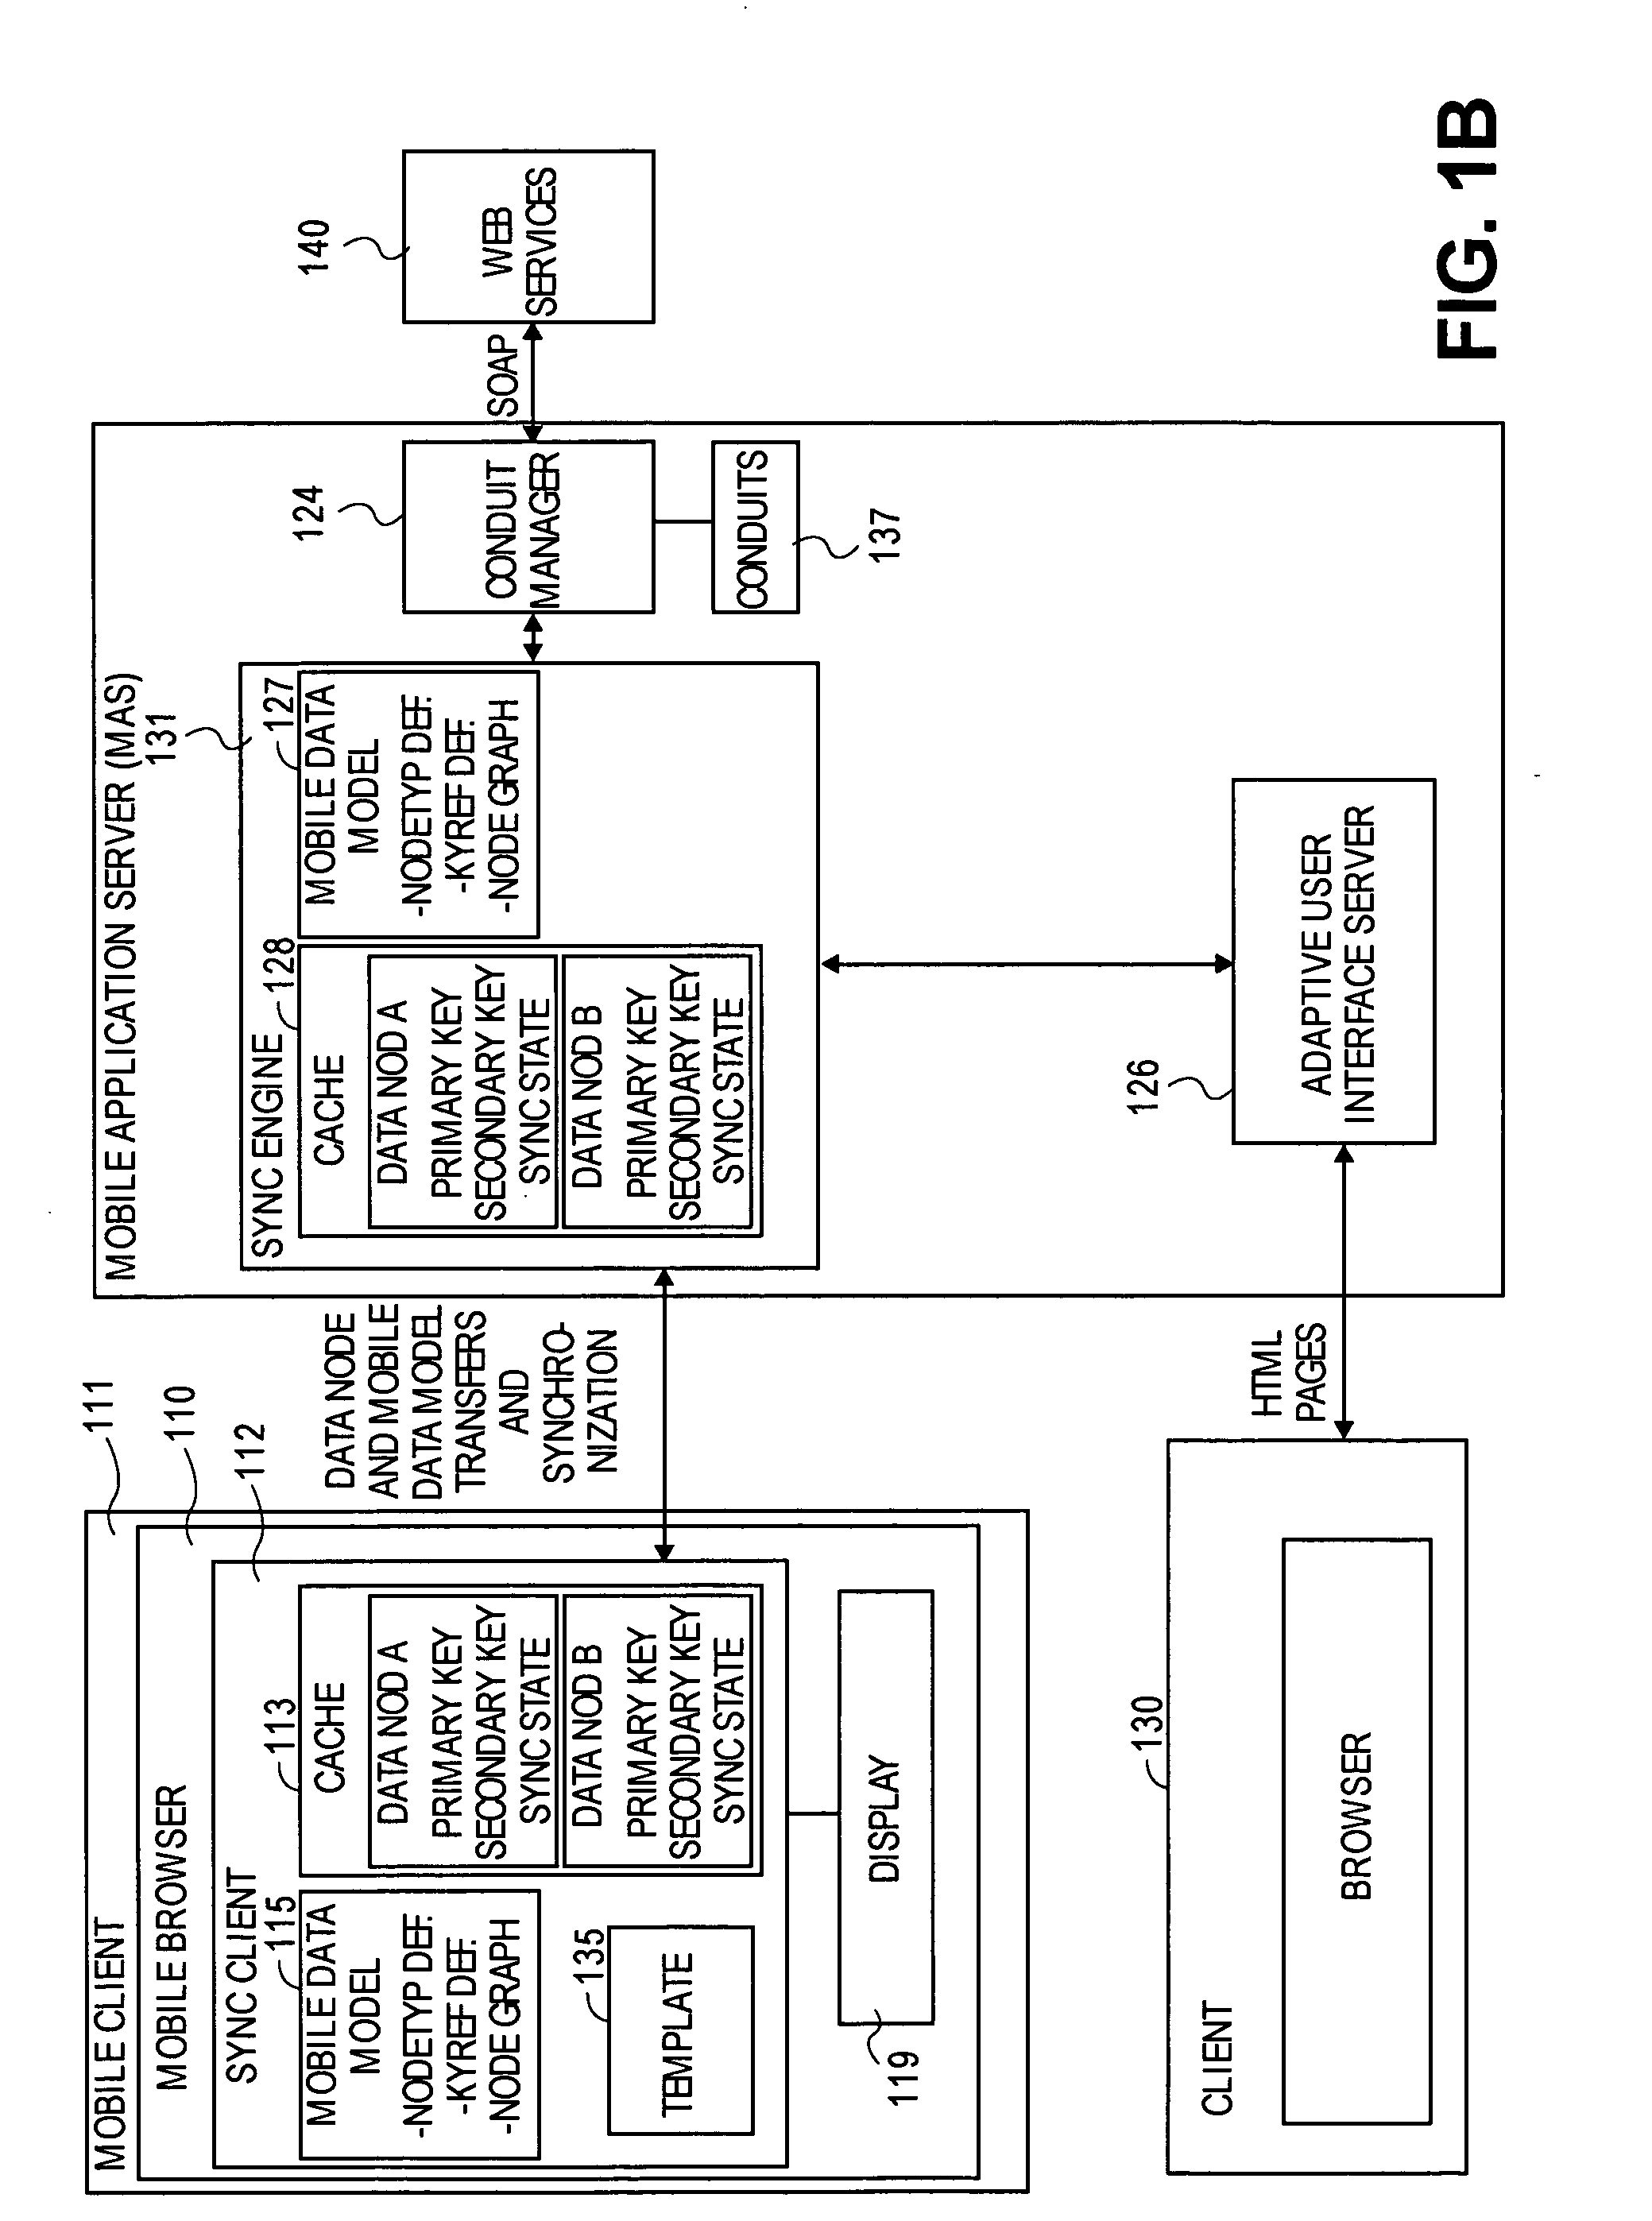 Synchronization protocol for occasionally-connected application server